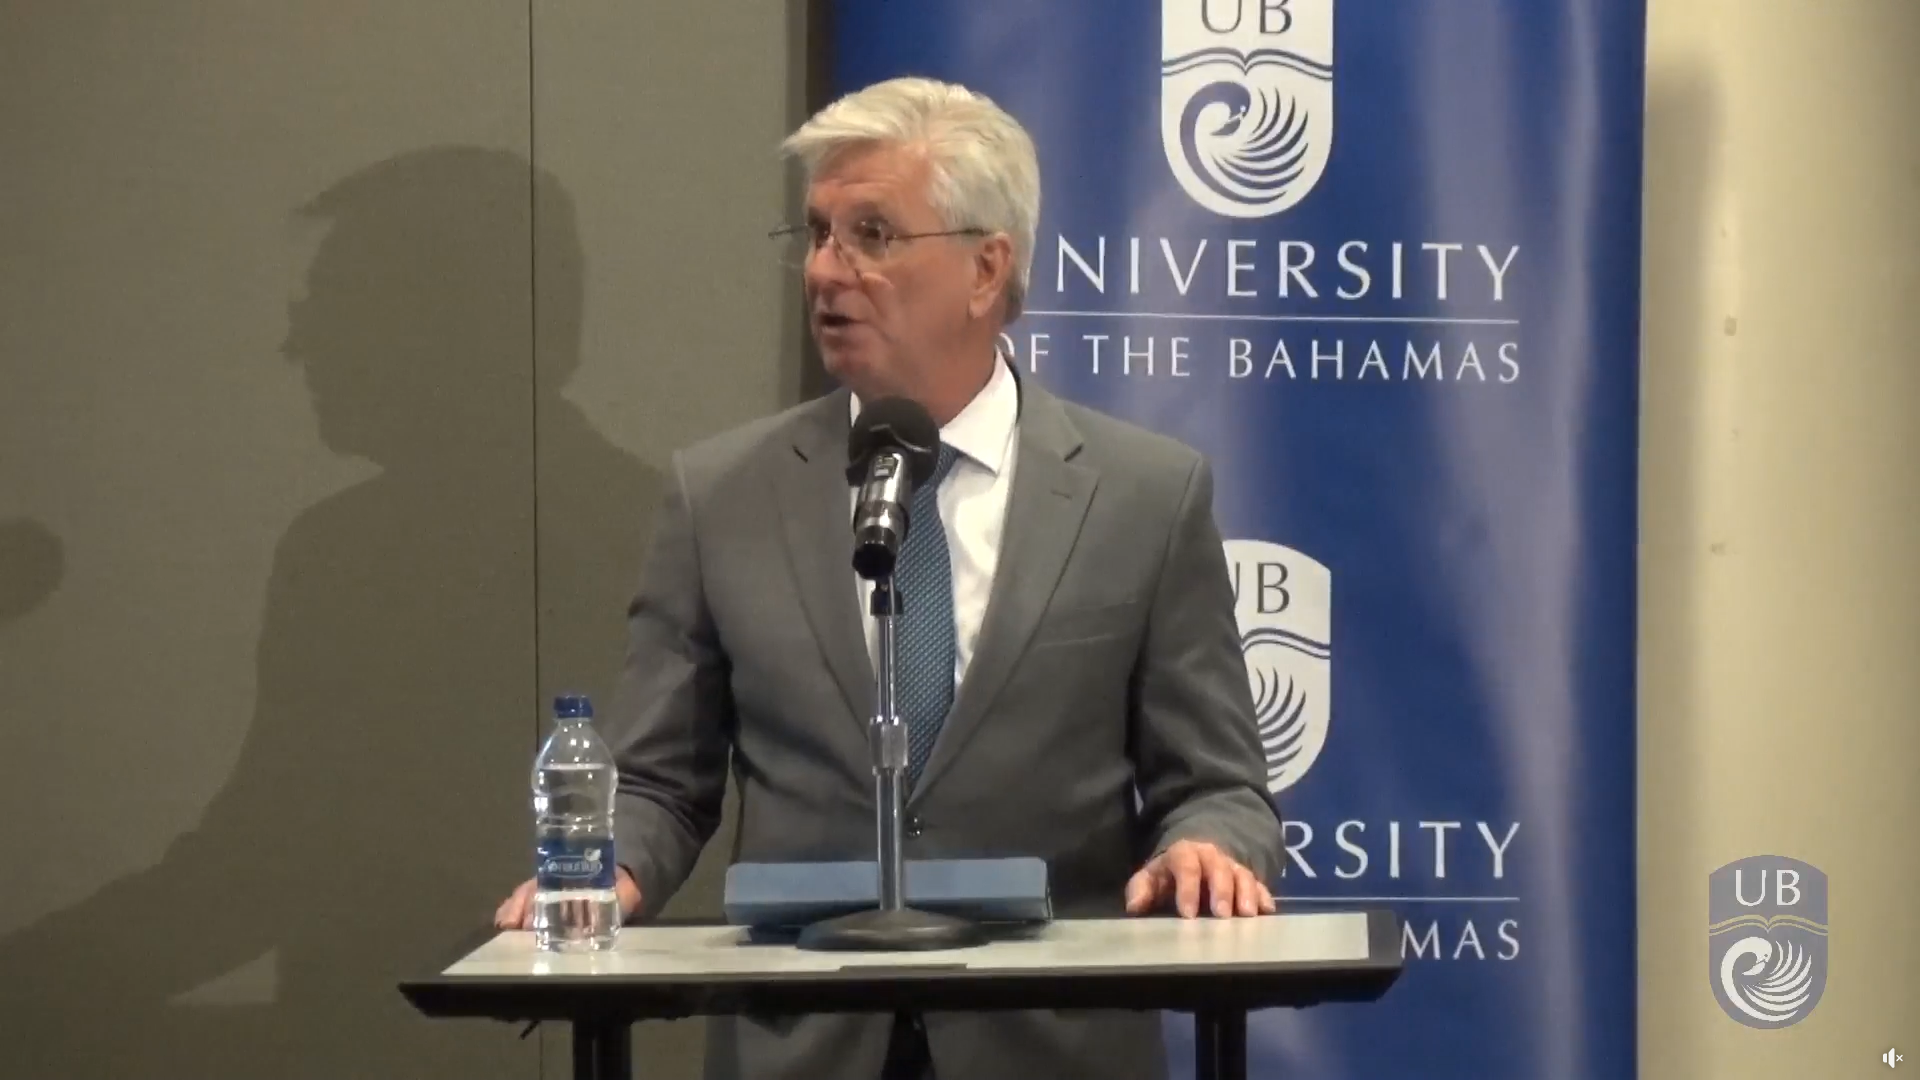 Waller speaking at the Climate, Currency, and Central Banking conference in Nassau, The Bahamas. Source: Facebook